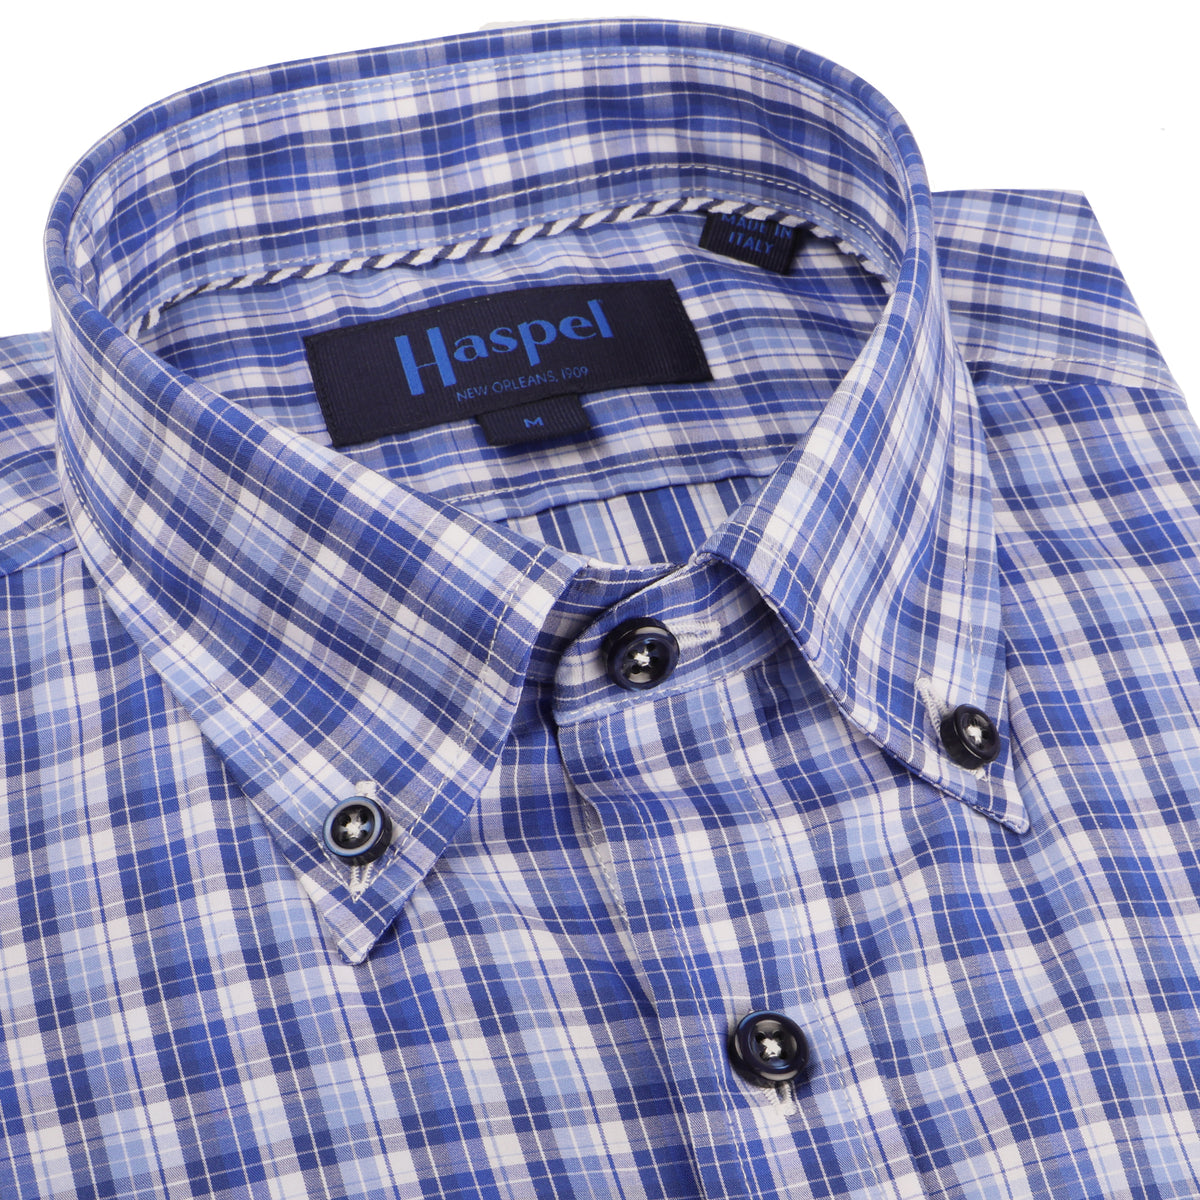 Freshen up your blue plaid shirt collection with this supremely soft 100% cotton beauty. Button down collar to keep you buttoned up. 